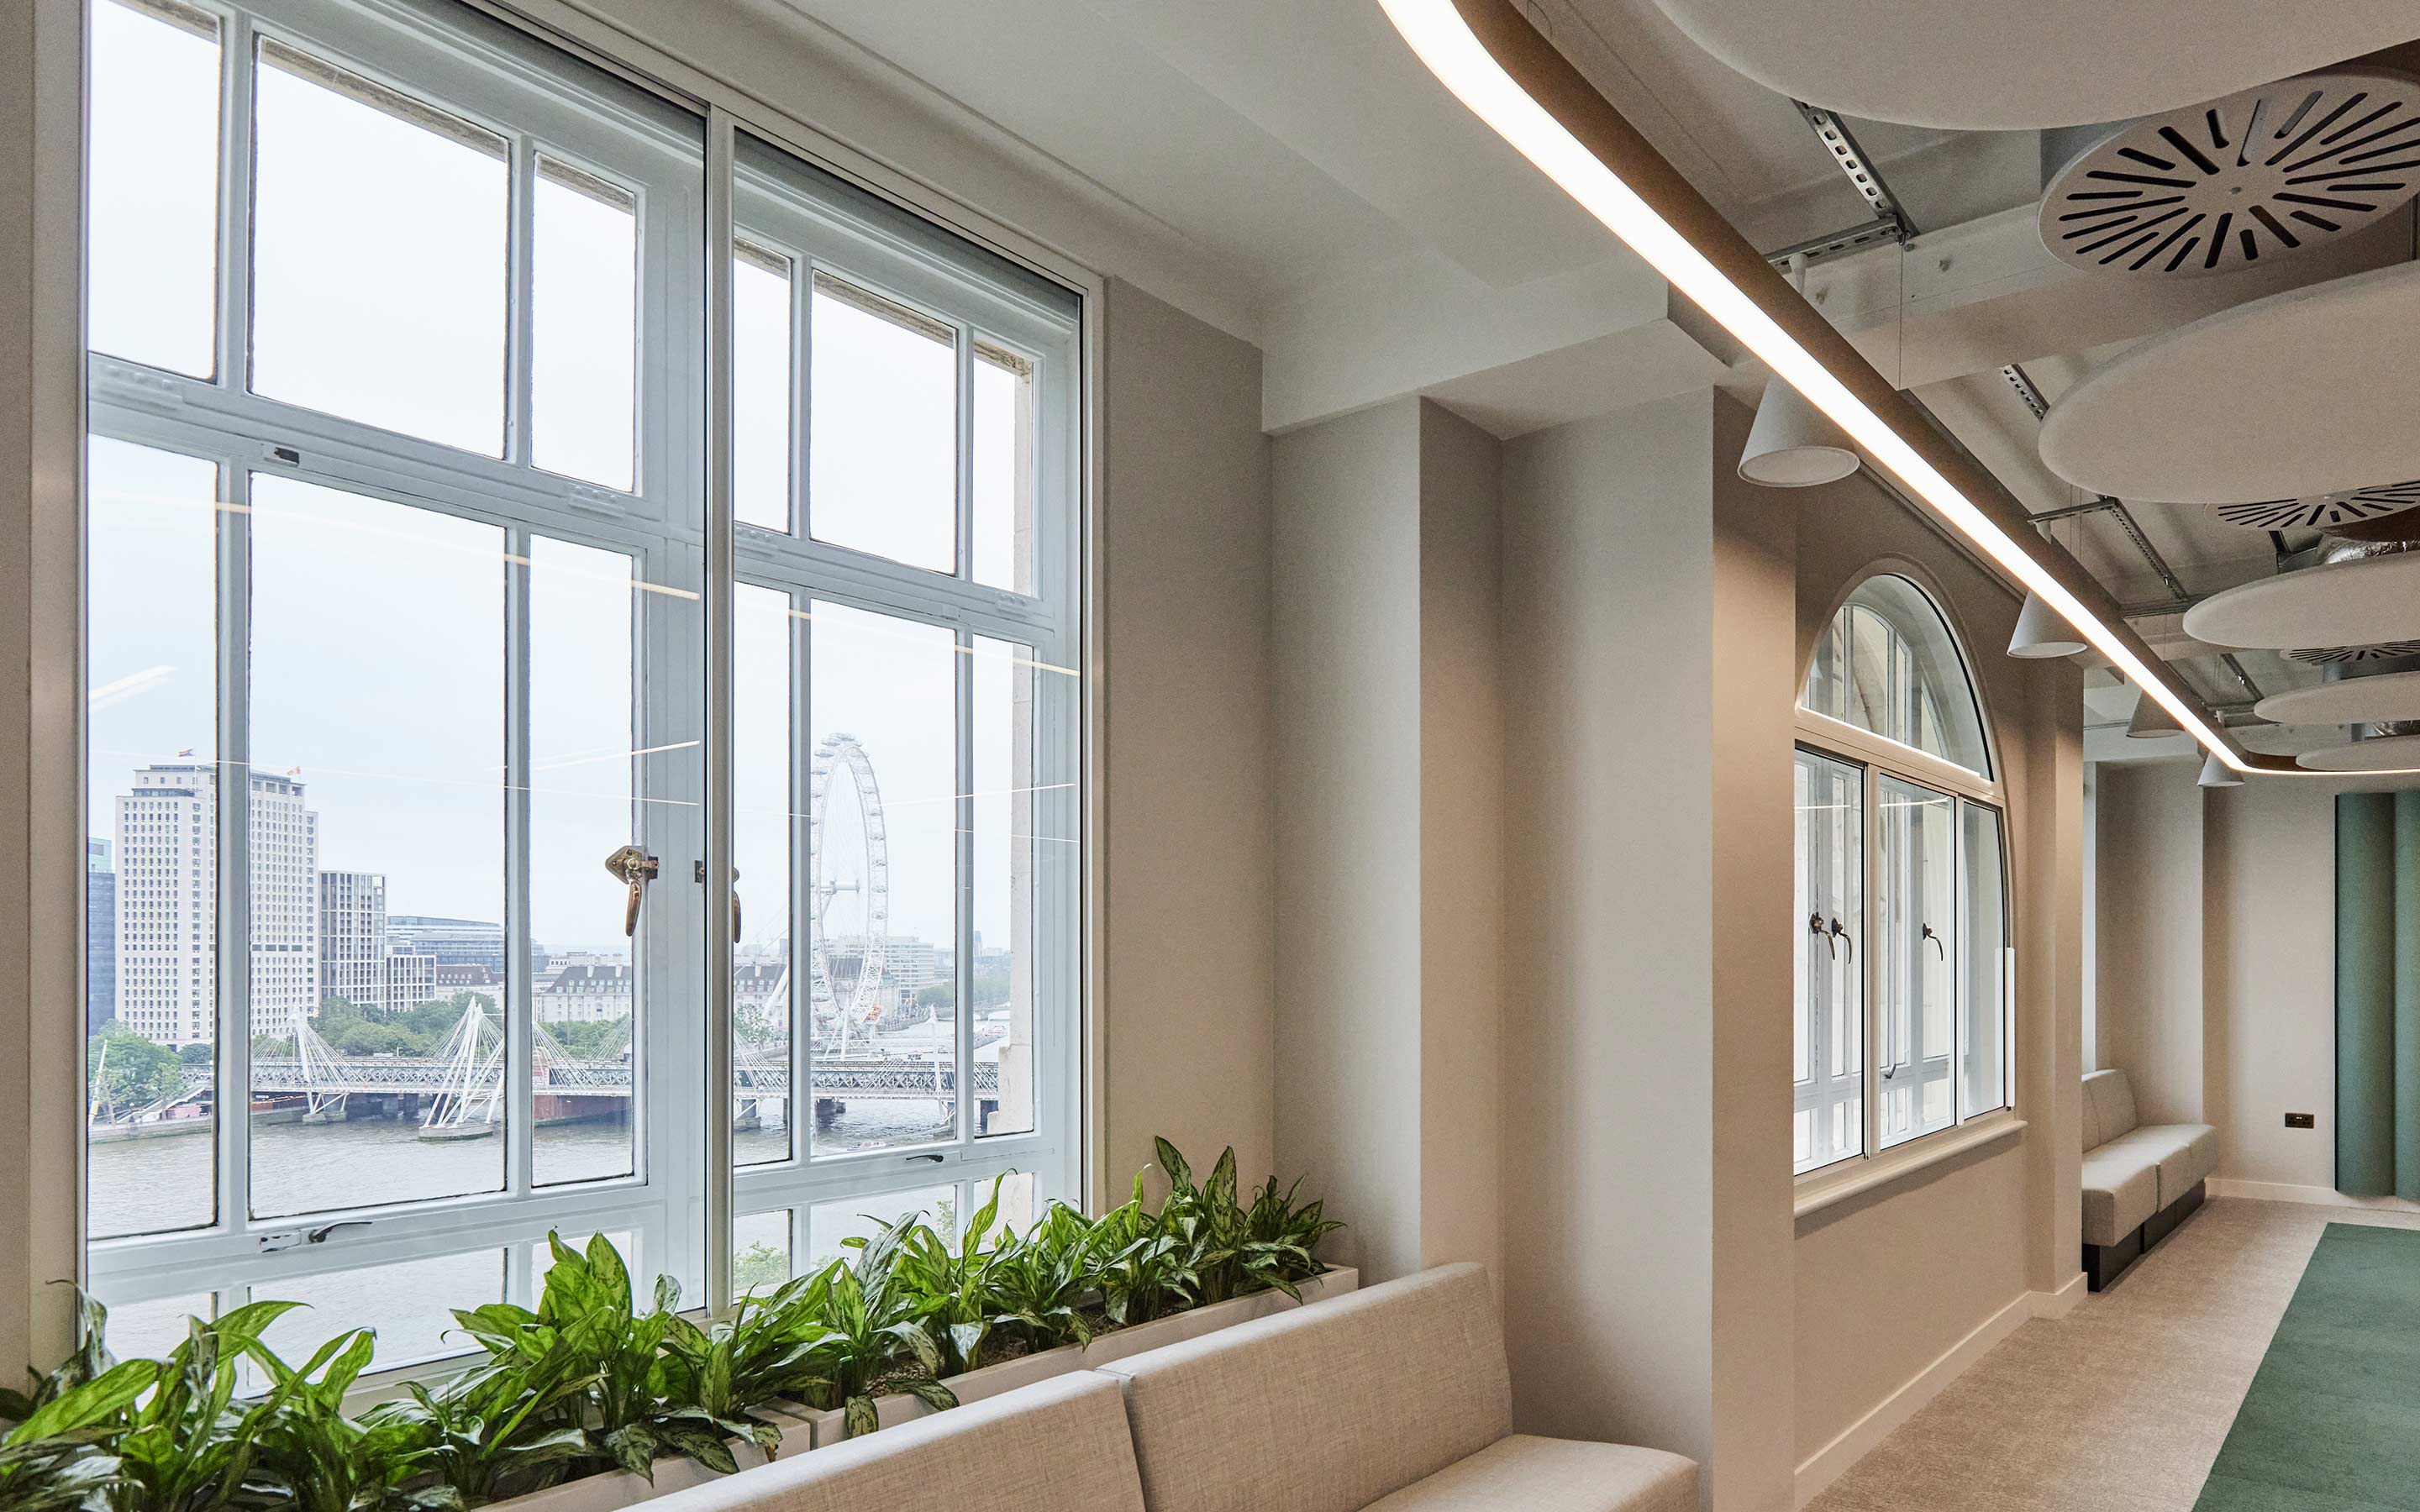 Biophilia frames views of the London skyline from an office boardroom